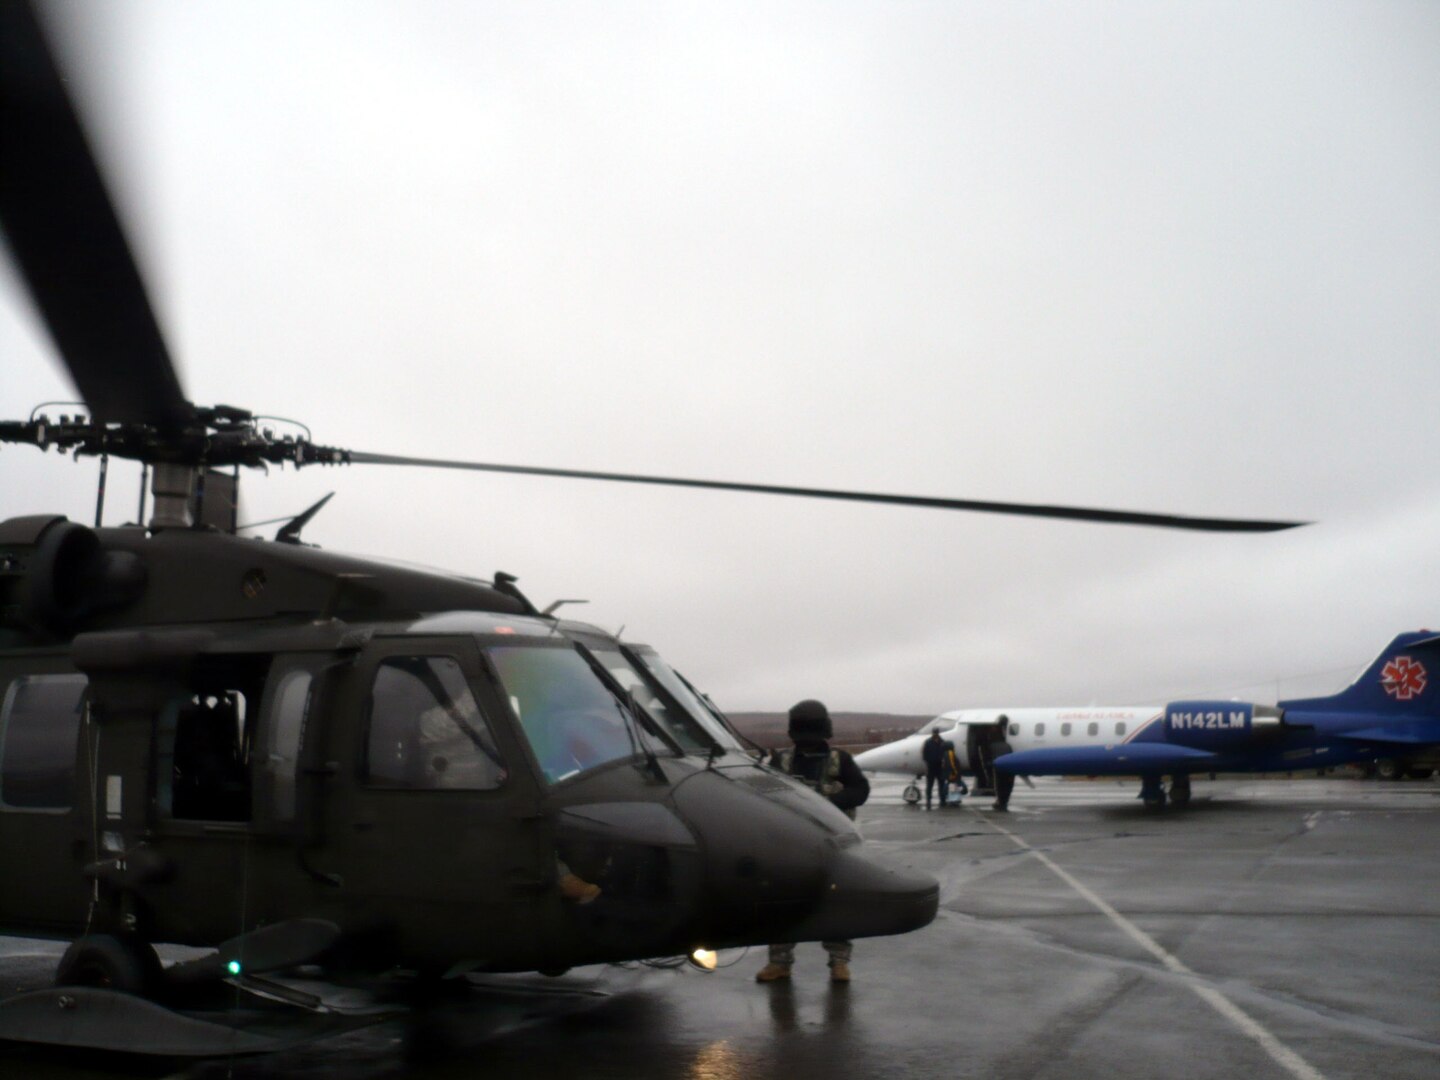 A three-month-old child suffering respiratory failure and mother are transported from an Alaska Army National Guard UH-60 Black Hawk to a LifeMed Alaska aircraft May 8 at the Bethel airport. Guardsmen transported the infant from the Hooper Bay clinic to Bethel with two flight medics from LifeMed Alaska onboard